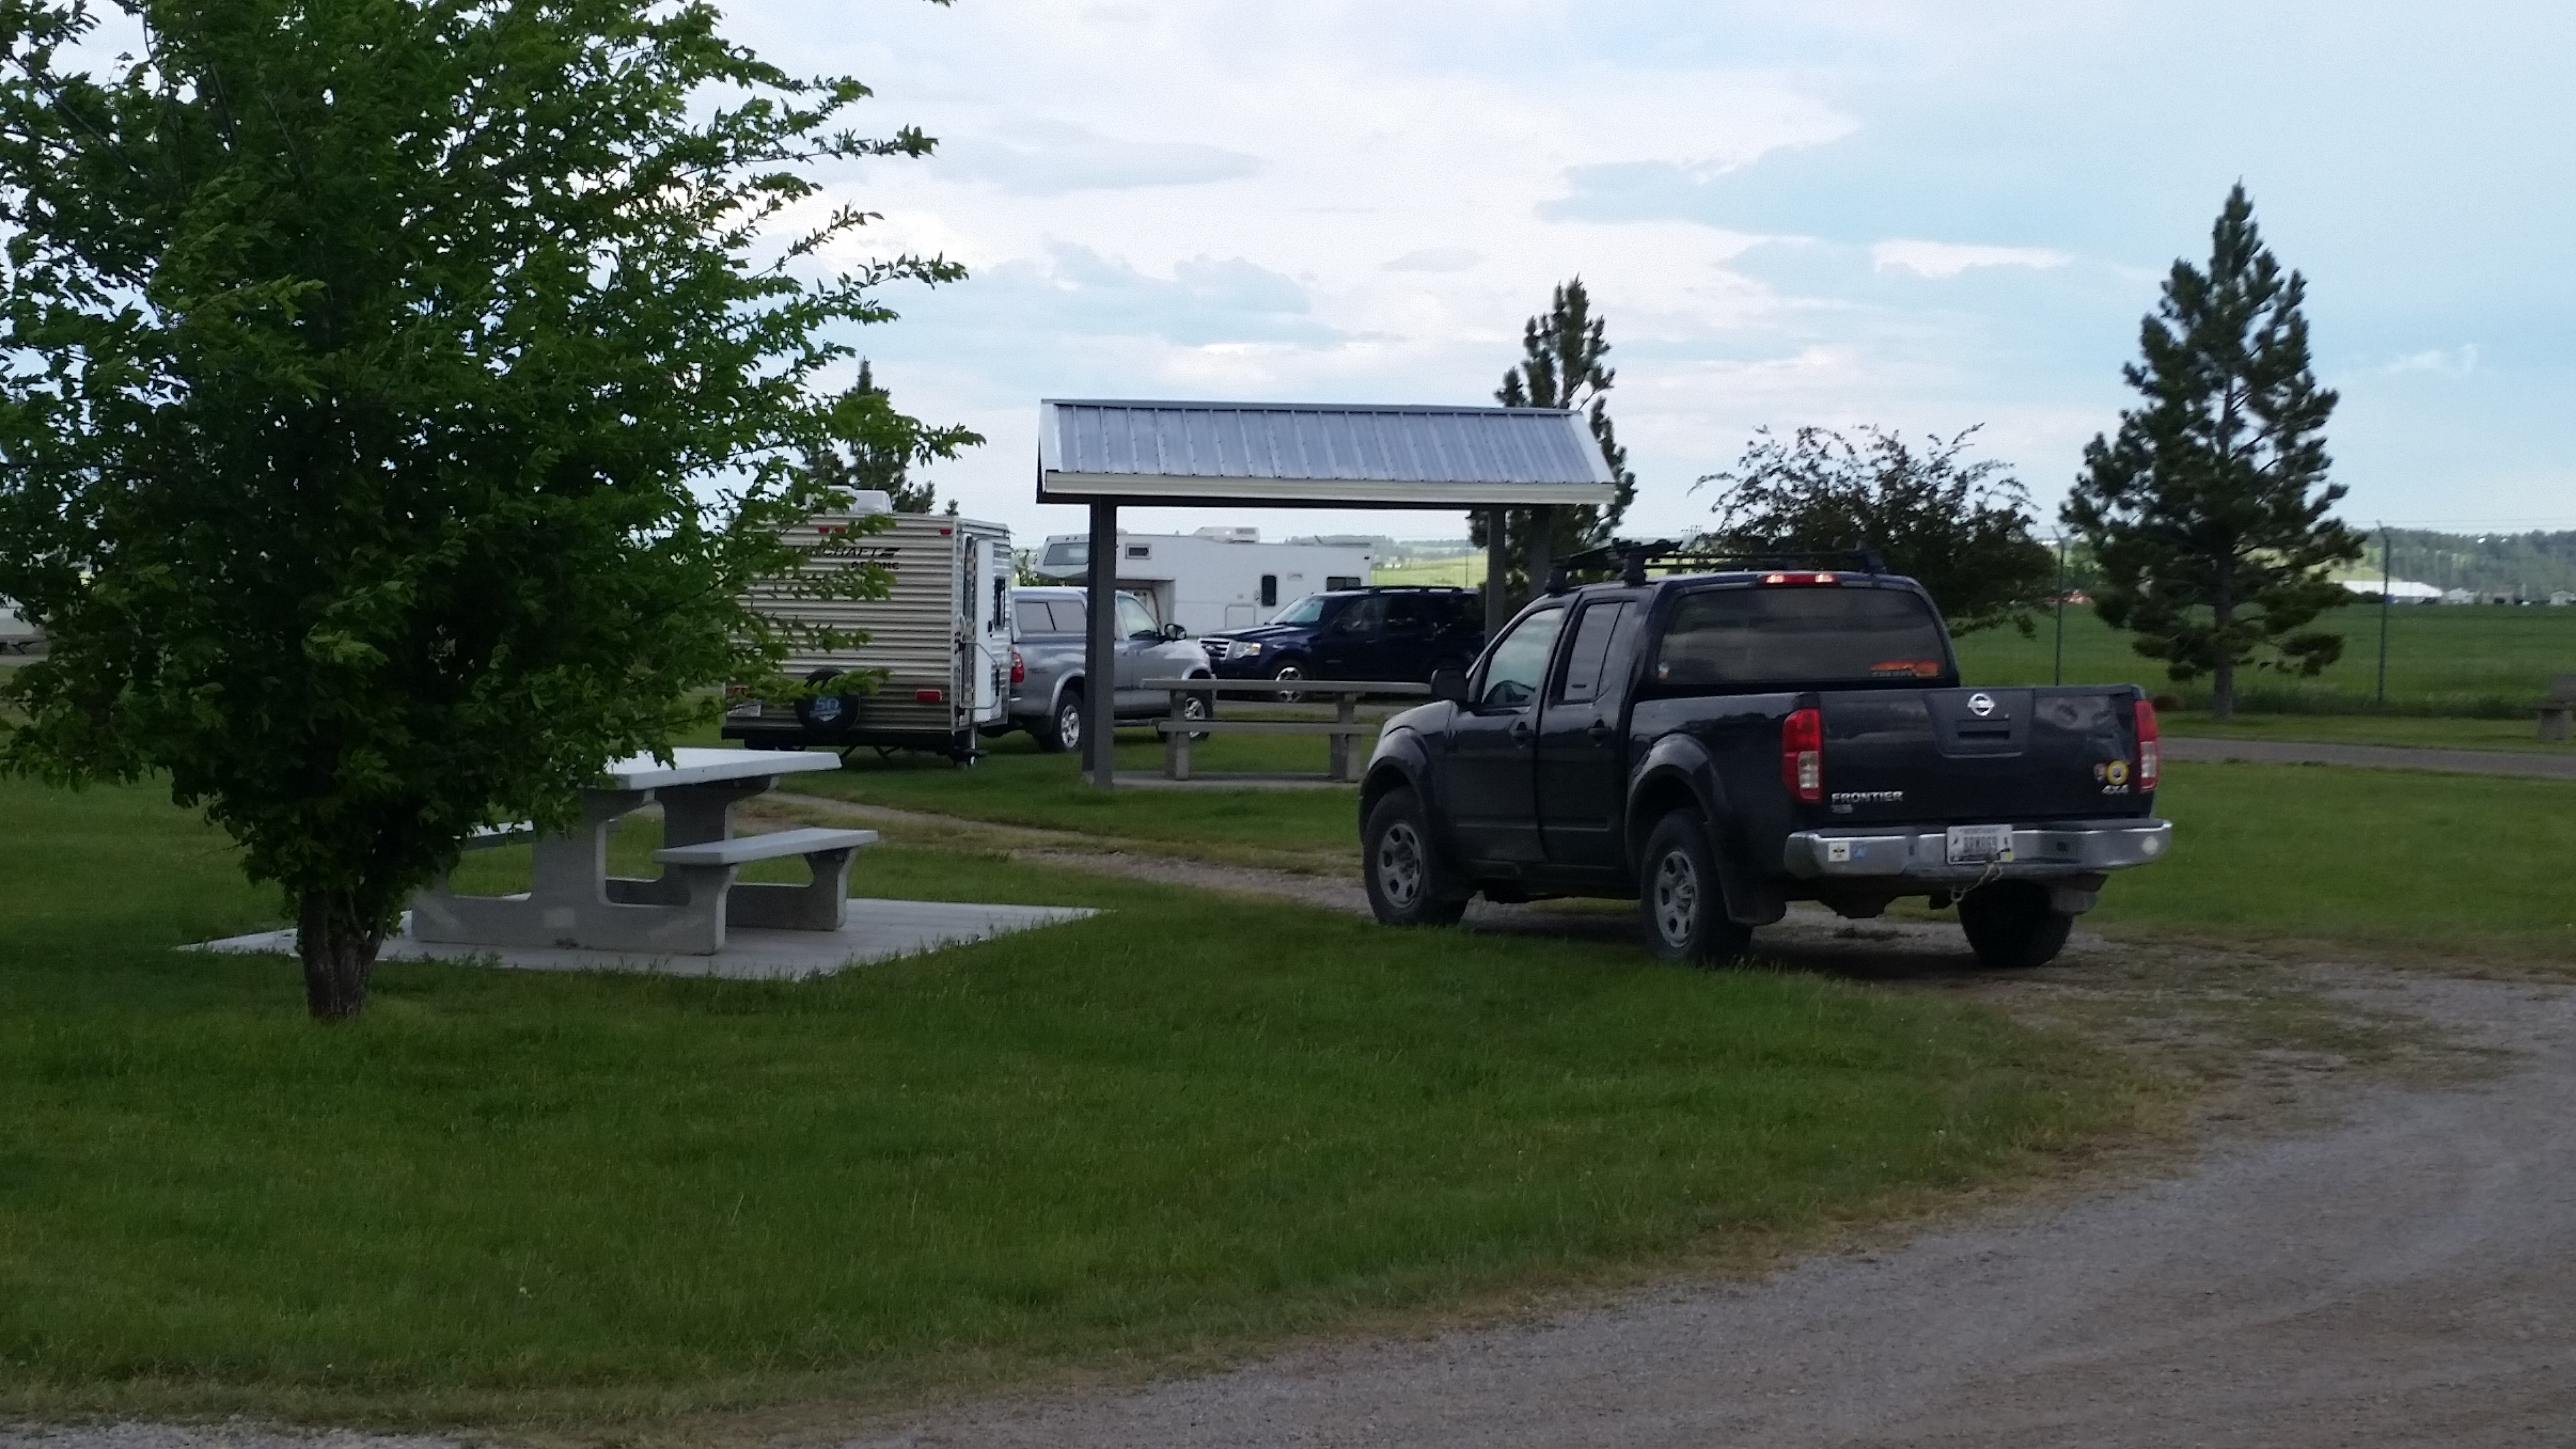 Camper submitted image from Kiwanis Park - 2